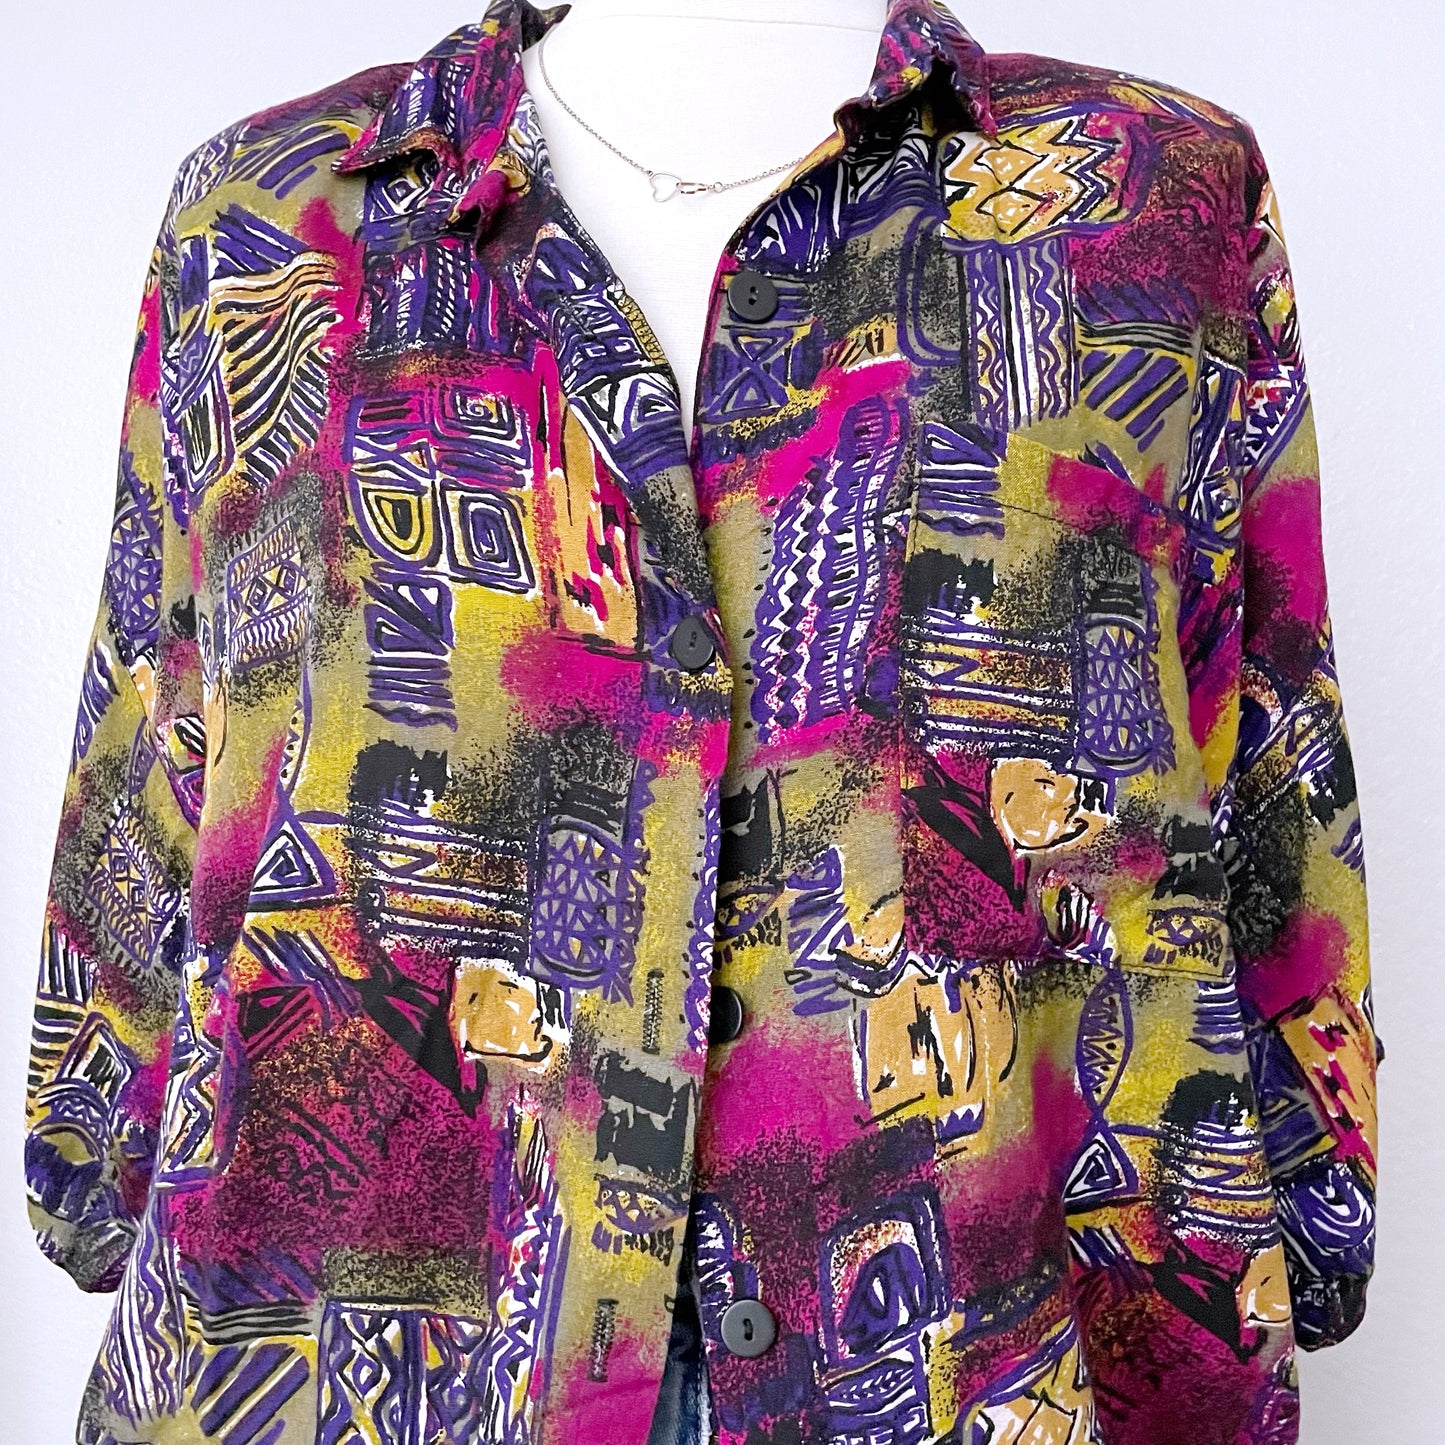 Vintage Abstract Retro Button Front Top (XL)